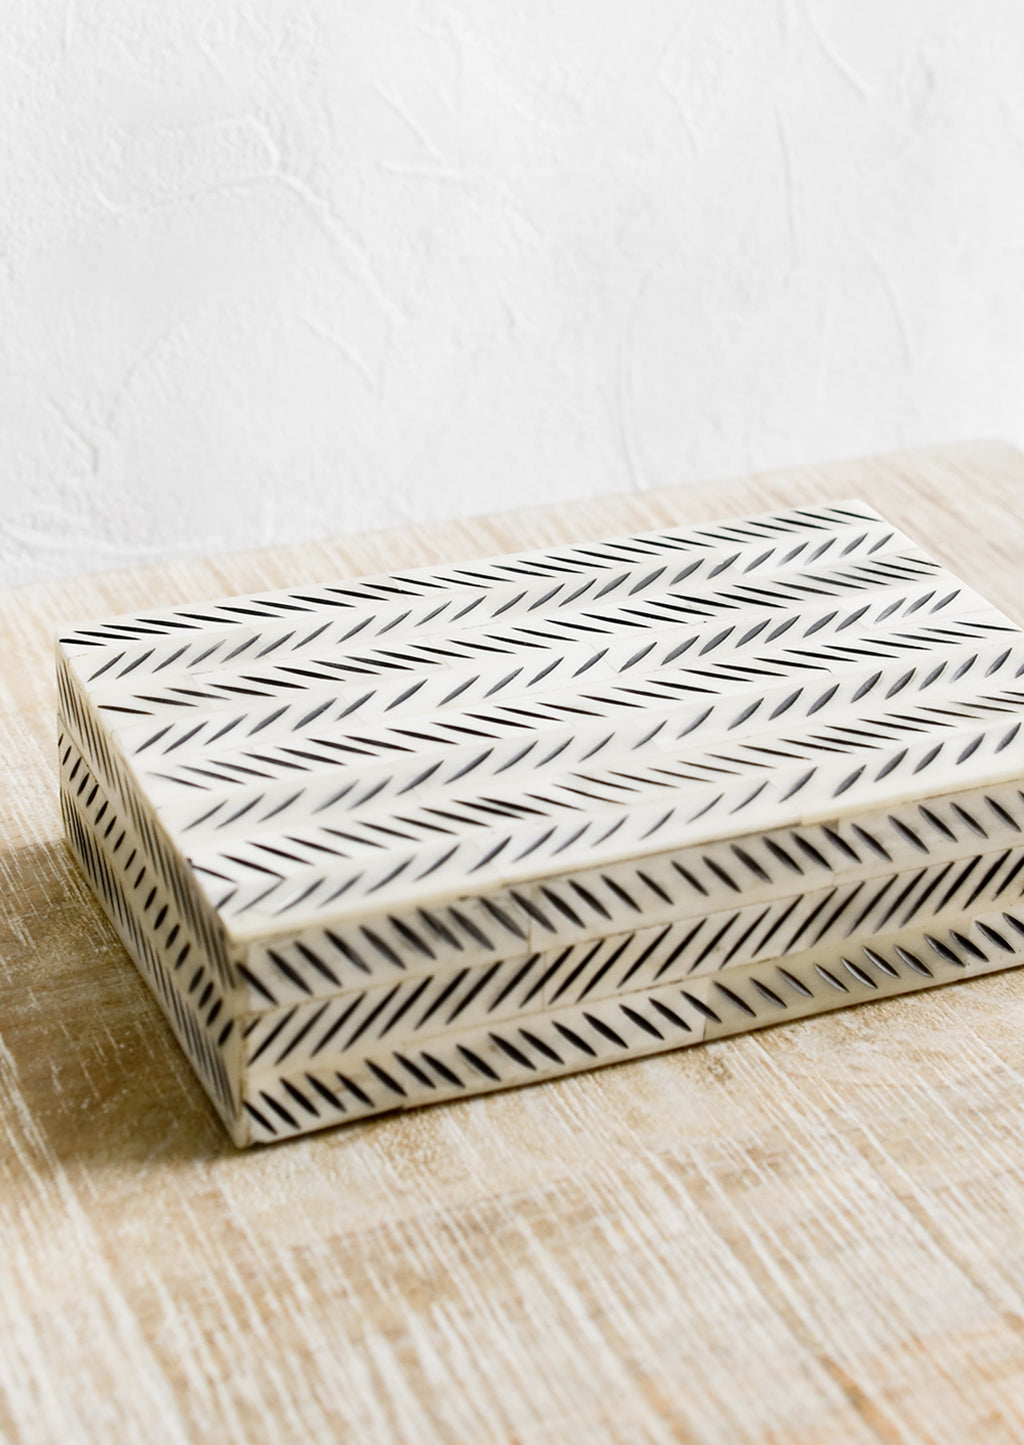 1: A decorative storage box made from ivory bone with black etched "slash" pattern.